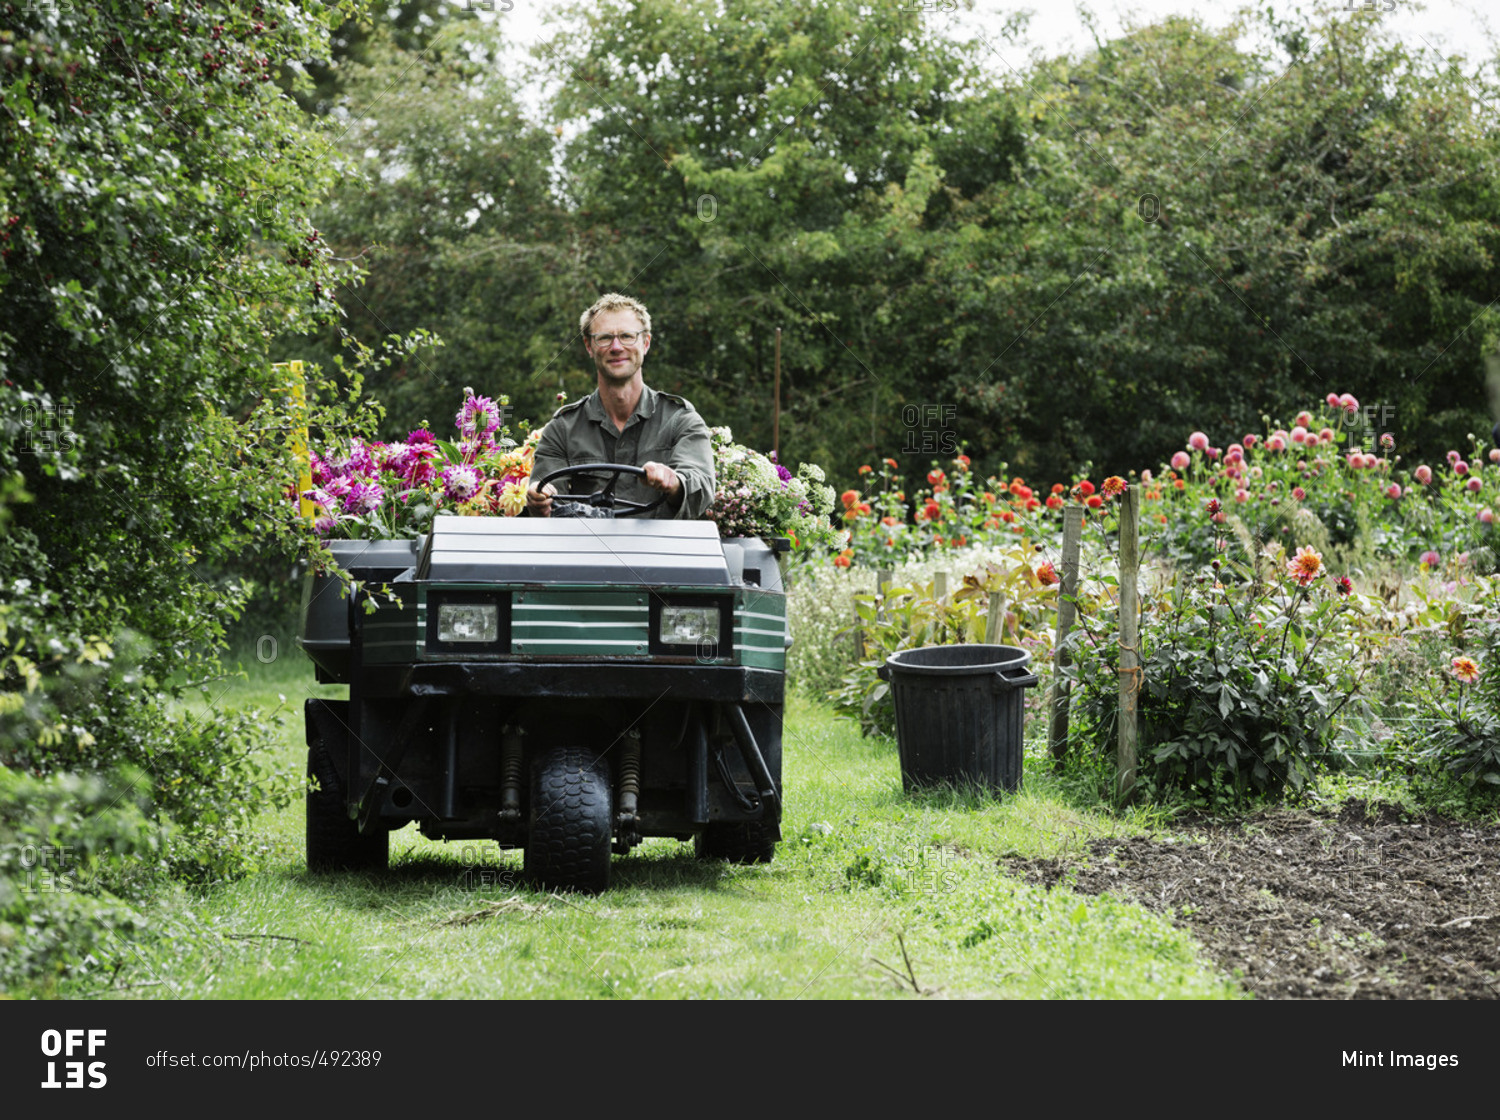 A man driving a small garden vehicle along the path between flowerbeds, loaded with cut flowers